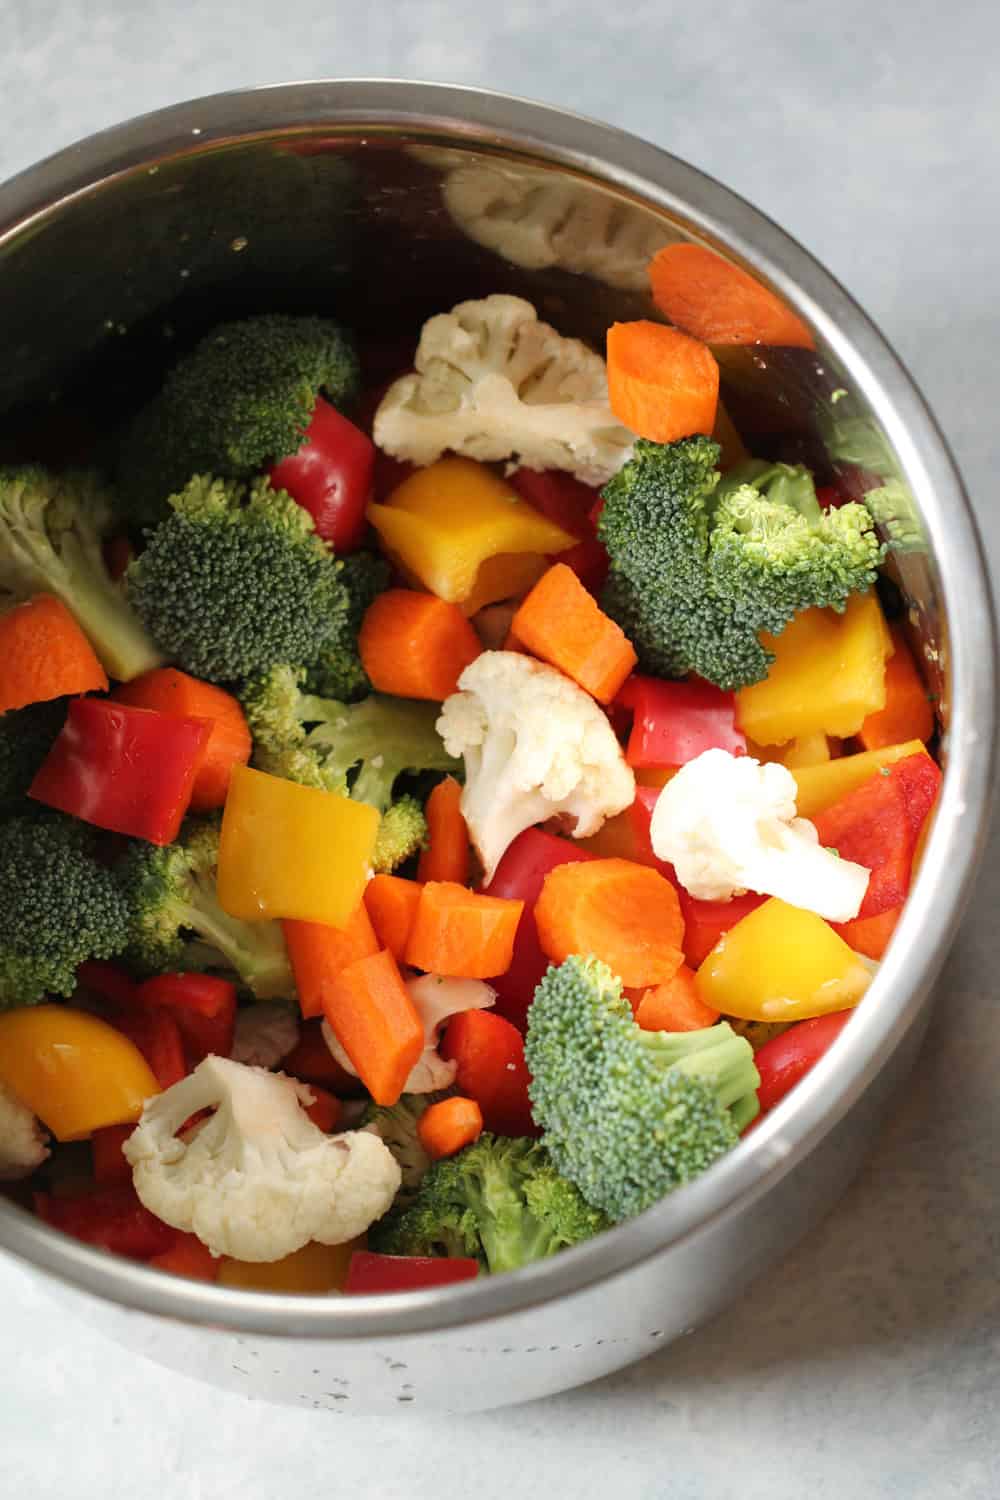 https://www.sixsistersstuff.com/wp-content/uploads/2020/04/Instant-Pot-Perfectly-Steamed-Vegetables-in-pot-for-six-sisters-stuff.jpg